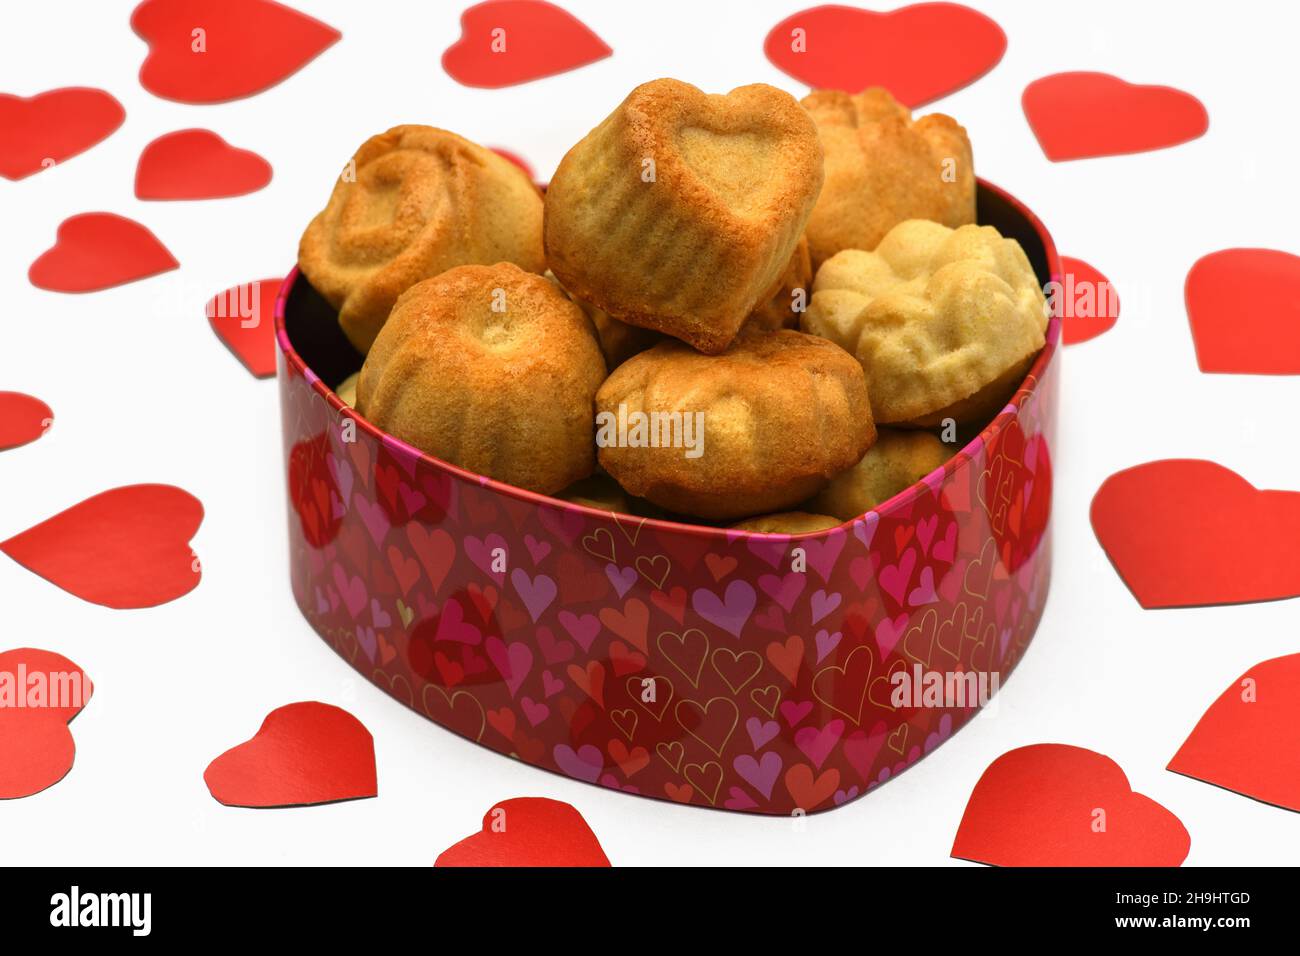 Isolate. Valentine's day. Box in the shape of a heart in it a lot of cupcakes, cookies, lie next to a lot of red carved hearts. Horizontal photography Stock Photo